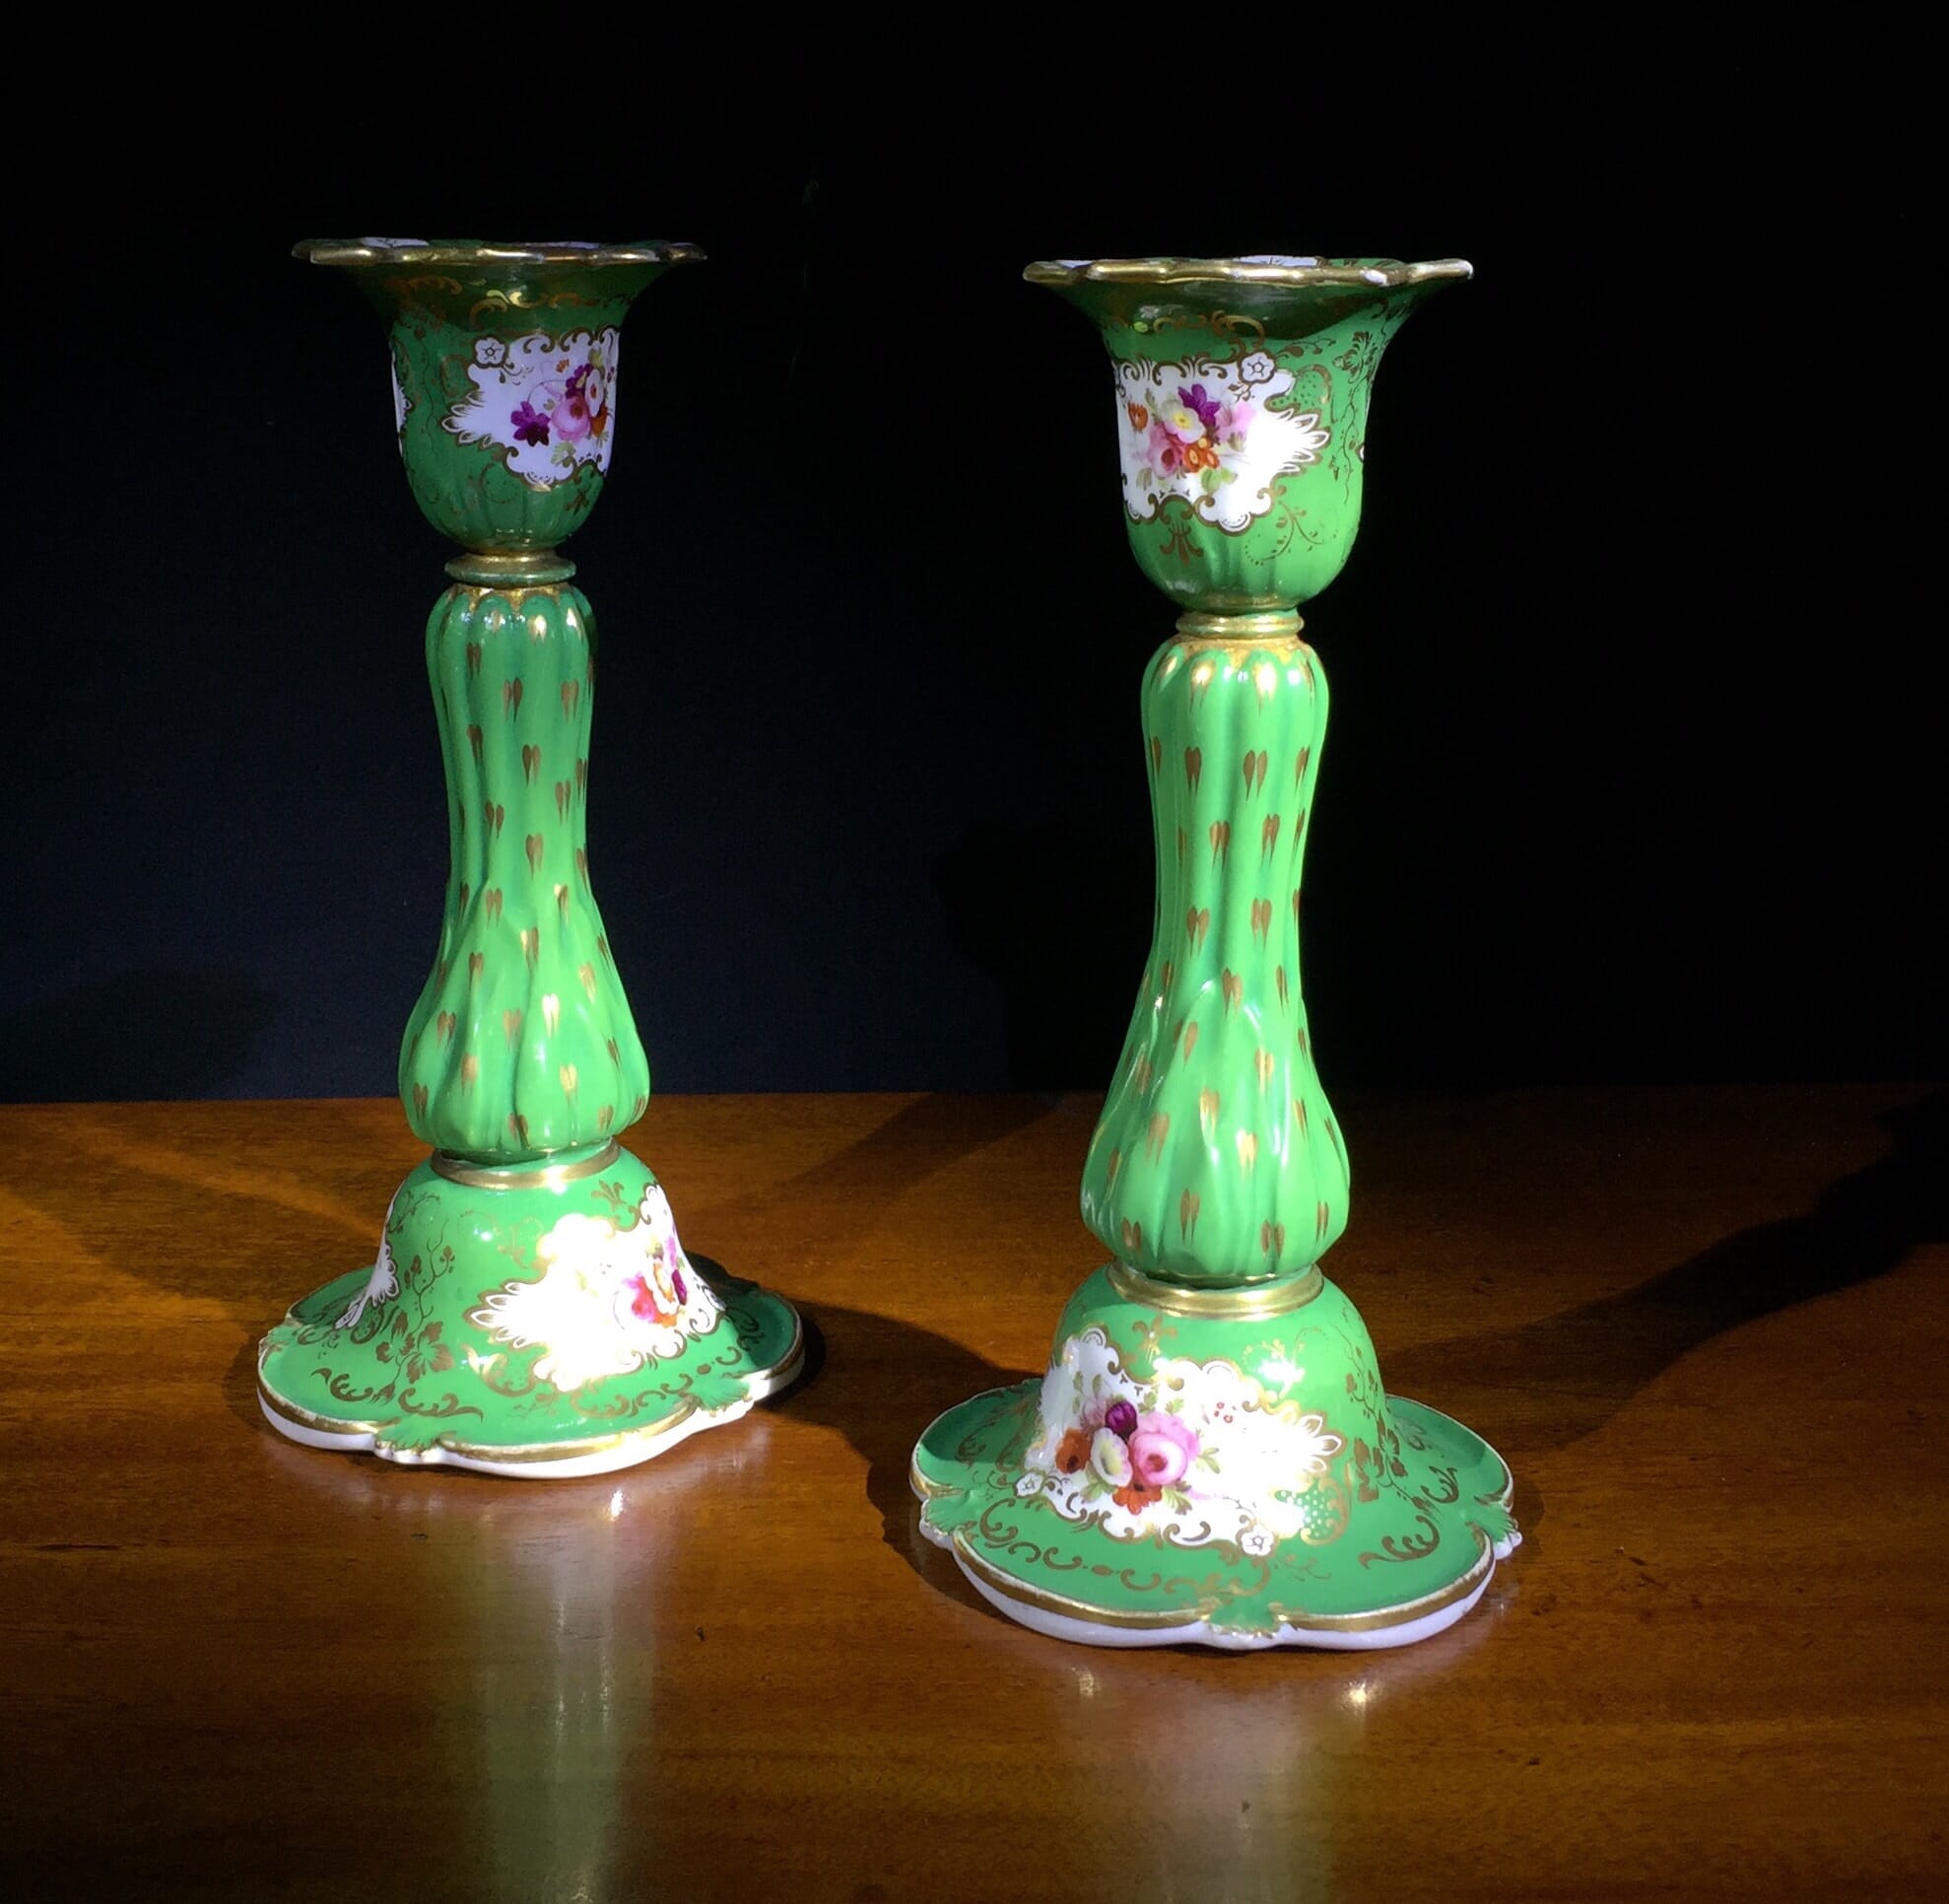 Pair of porcelain candlesticks, green with flowers, c.1830-0